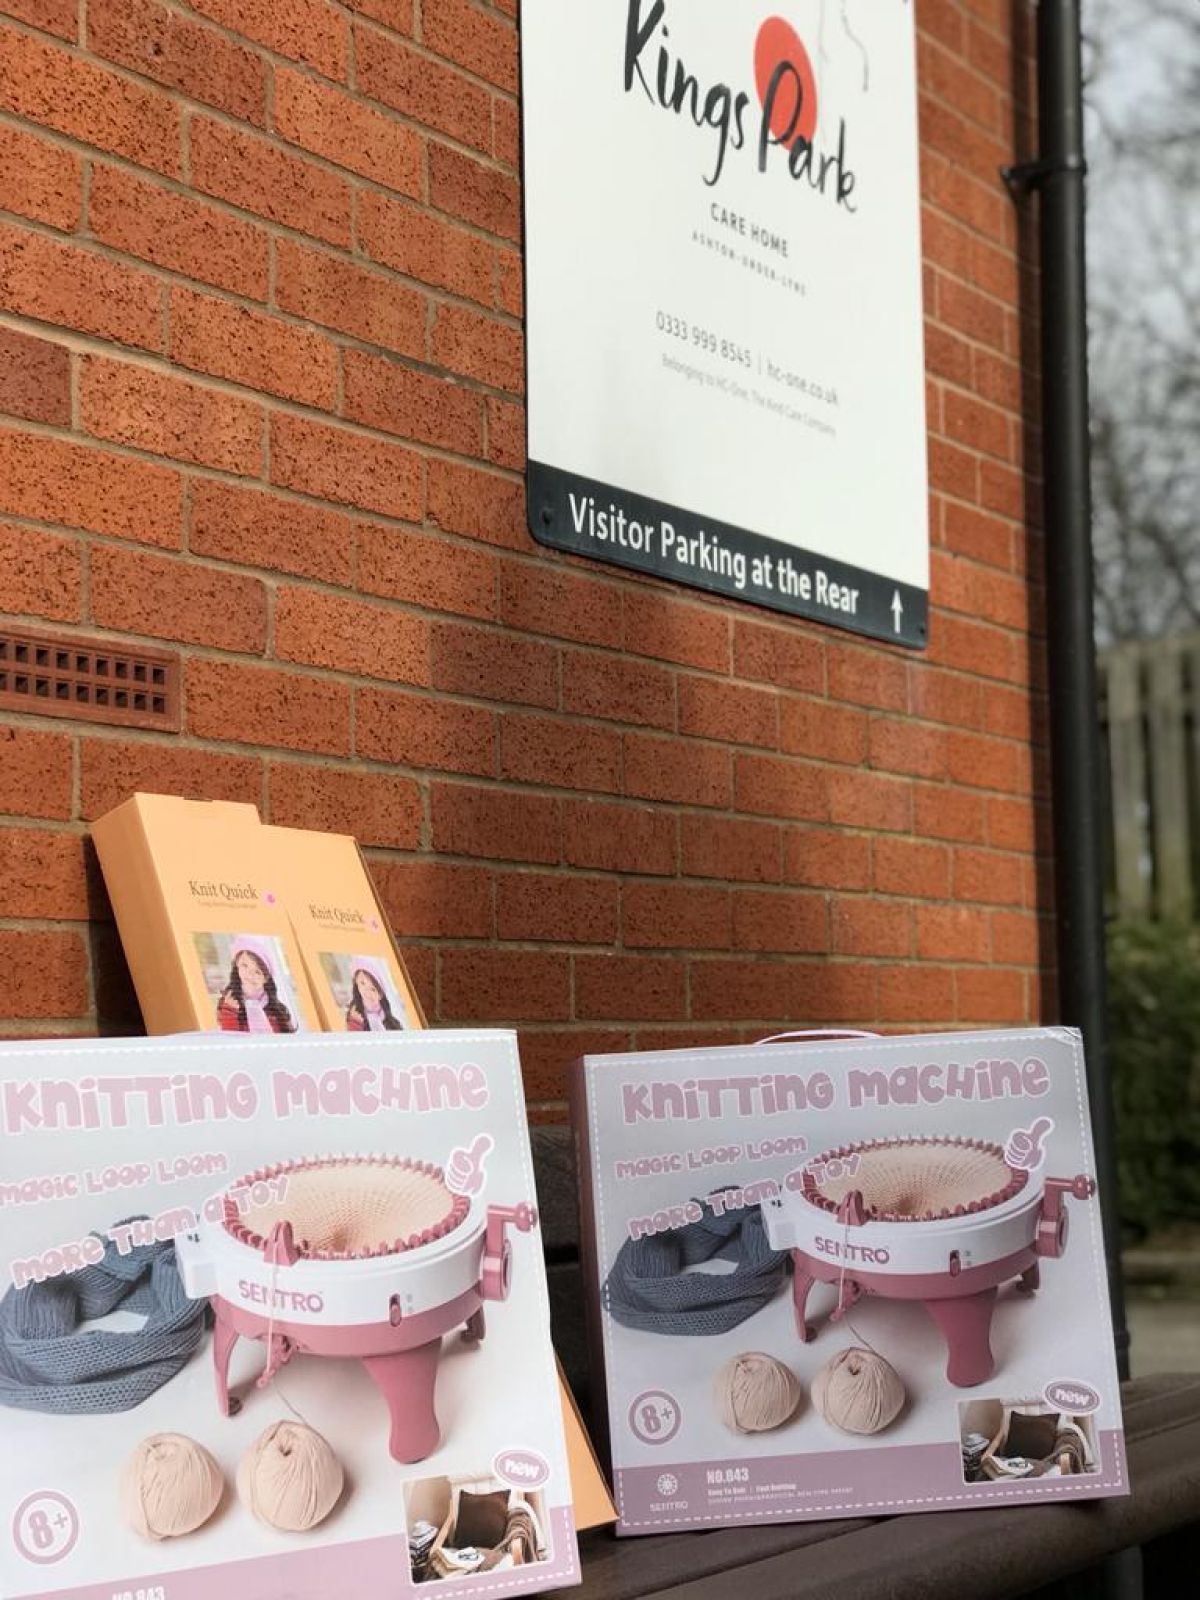 Knitting Looms and Wool for Care Home - 